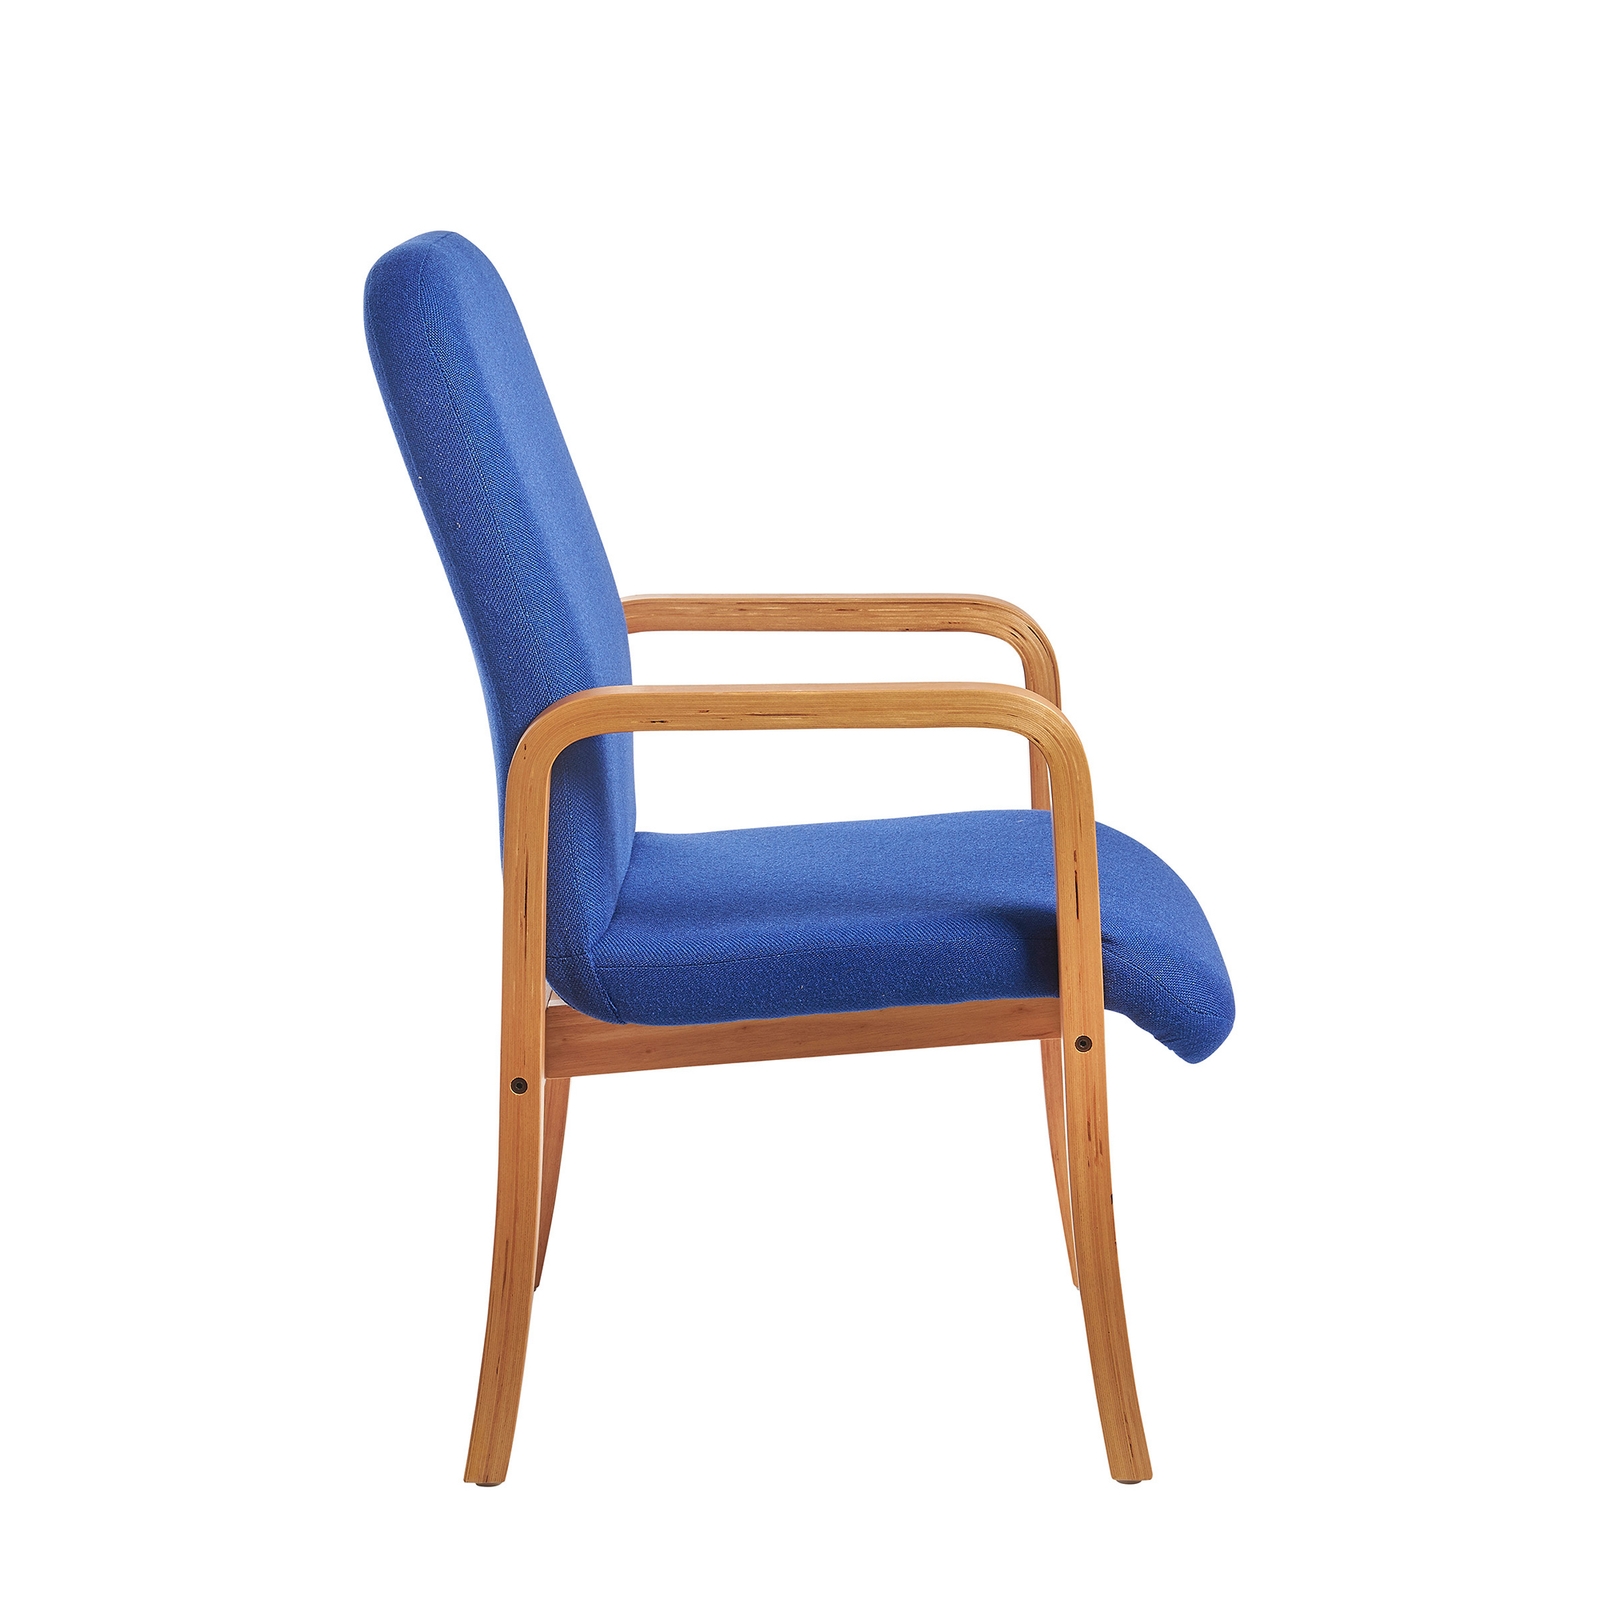 Yealm chair with double arm - Blue